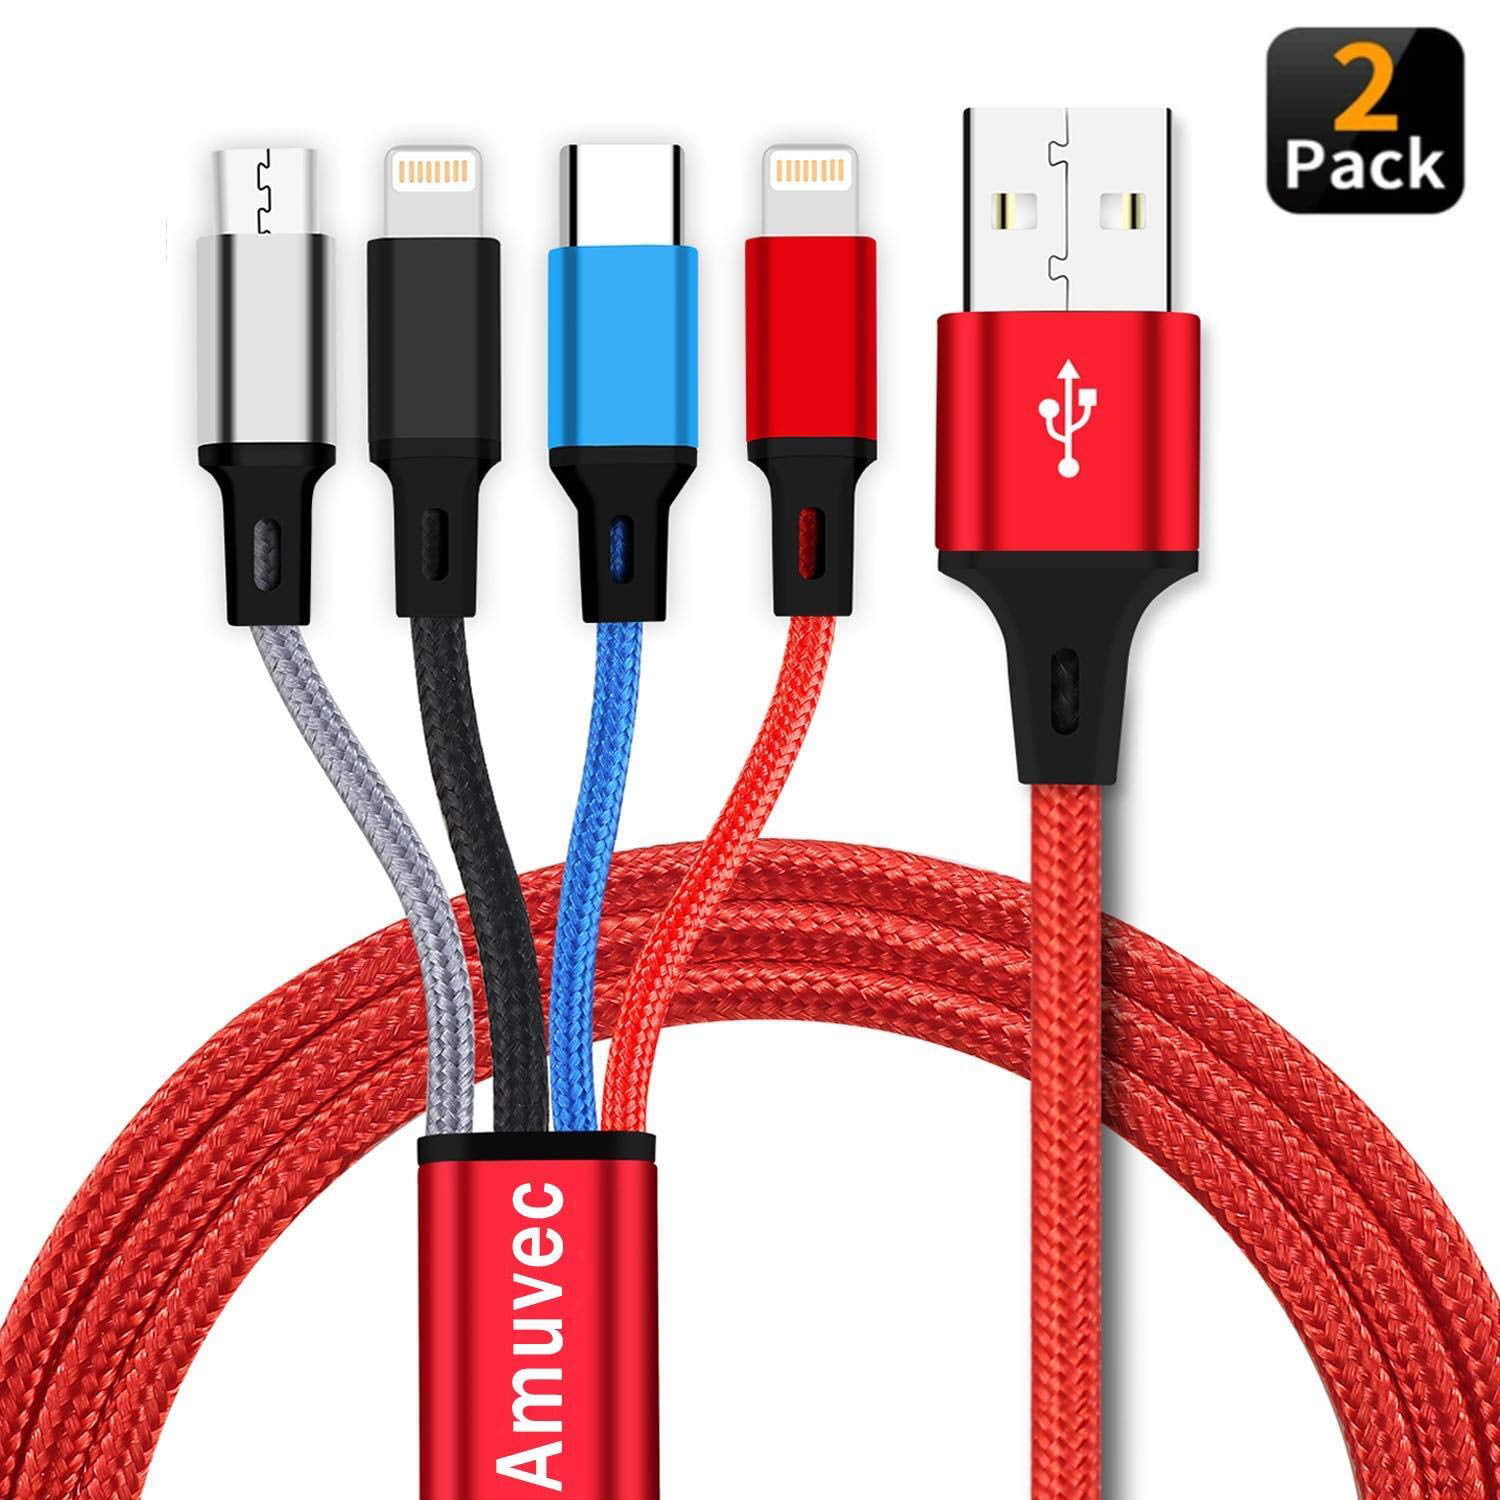 Amuvec 4 in 1 Retractable USB Charging Cable,Multi Fast Charge with Dual iP/Type C/Micro USB Port for Mobile Phone Xs Xr X Samsung Galaxy S10 S9 S8 Google Pixel Huawei P20 P10 Xiaomi Honor LG and More 